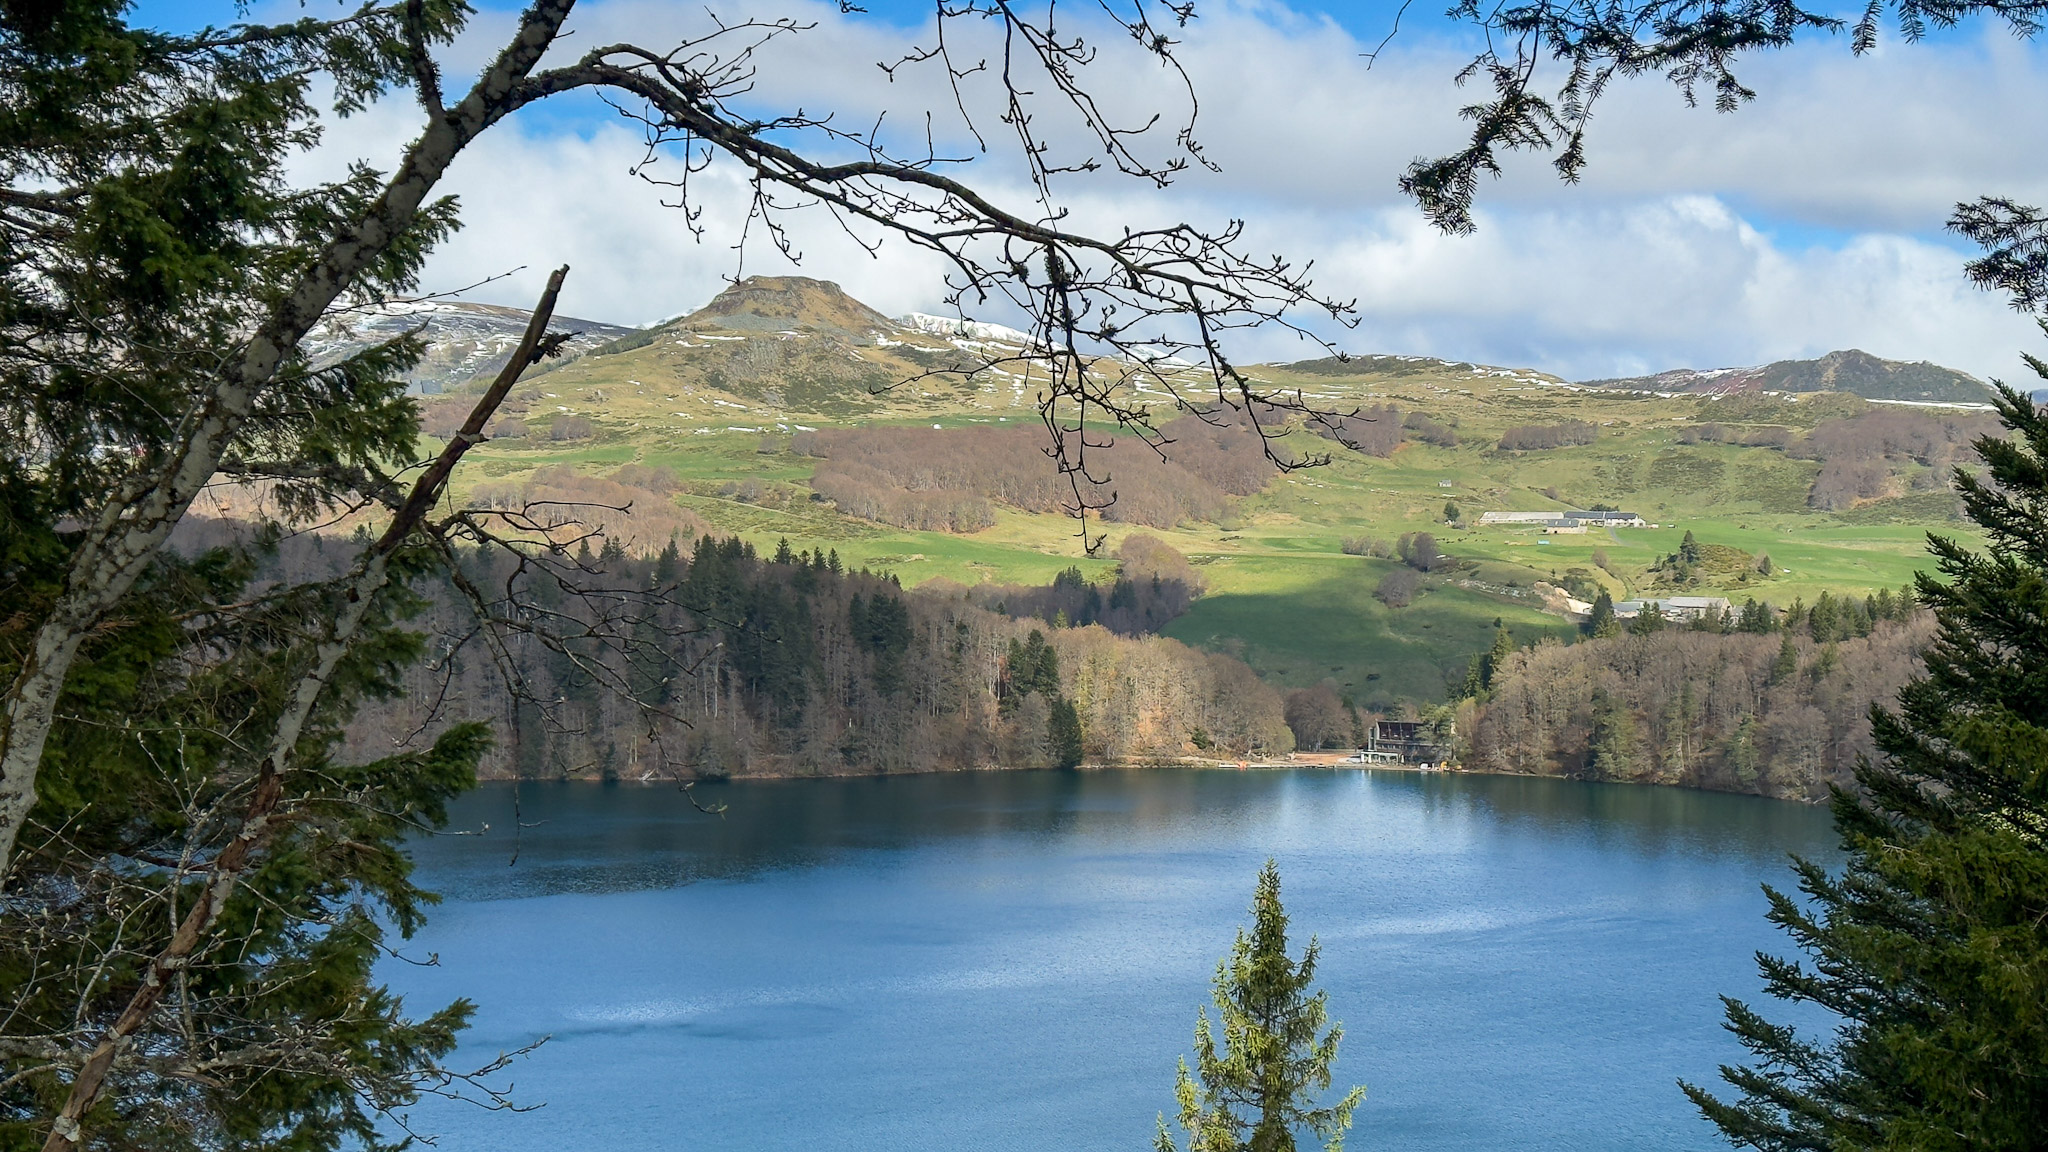 From Lac Pavin to Puy de Chambourguet